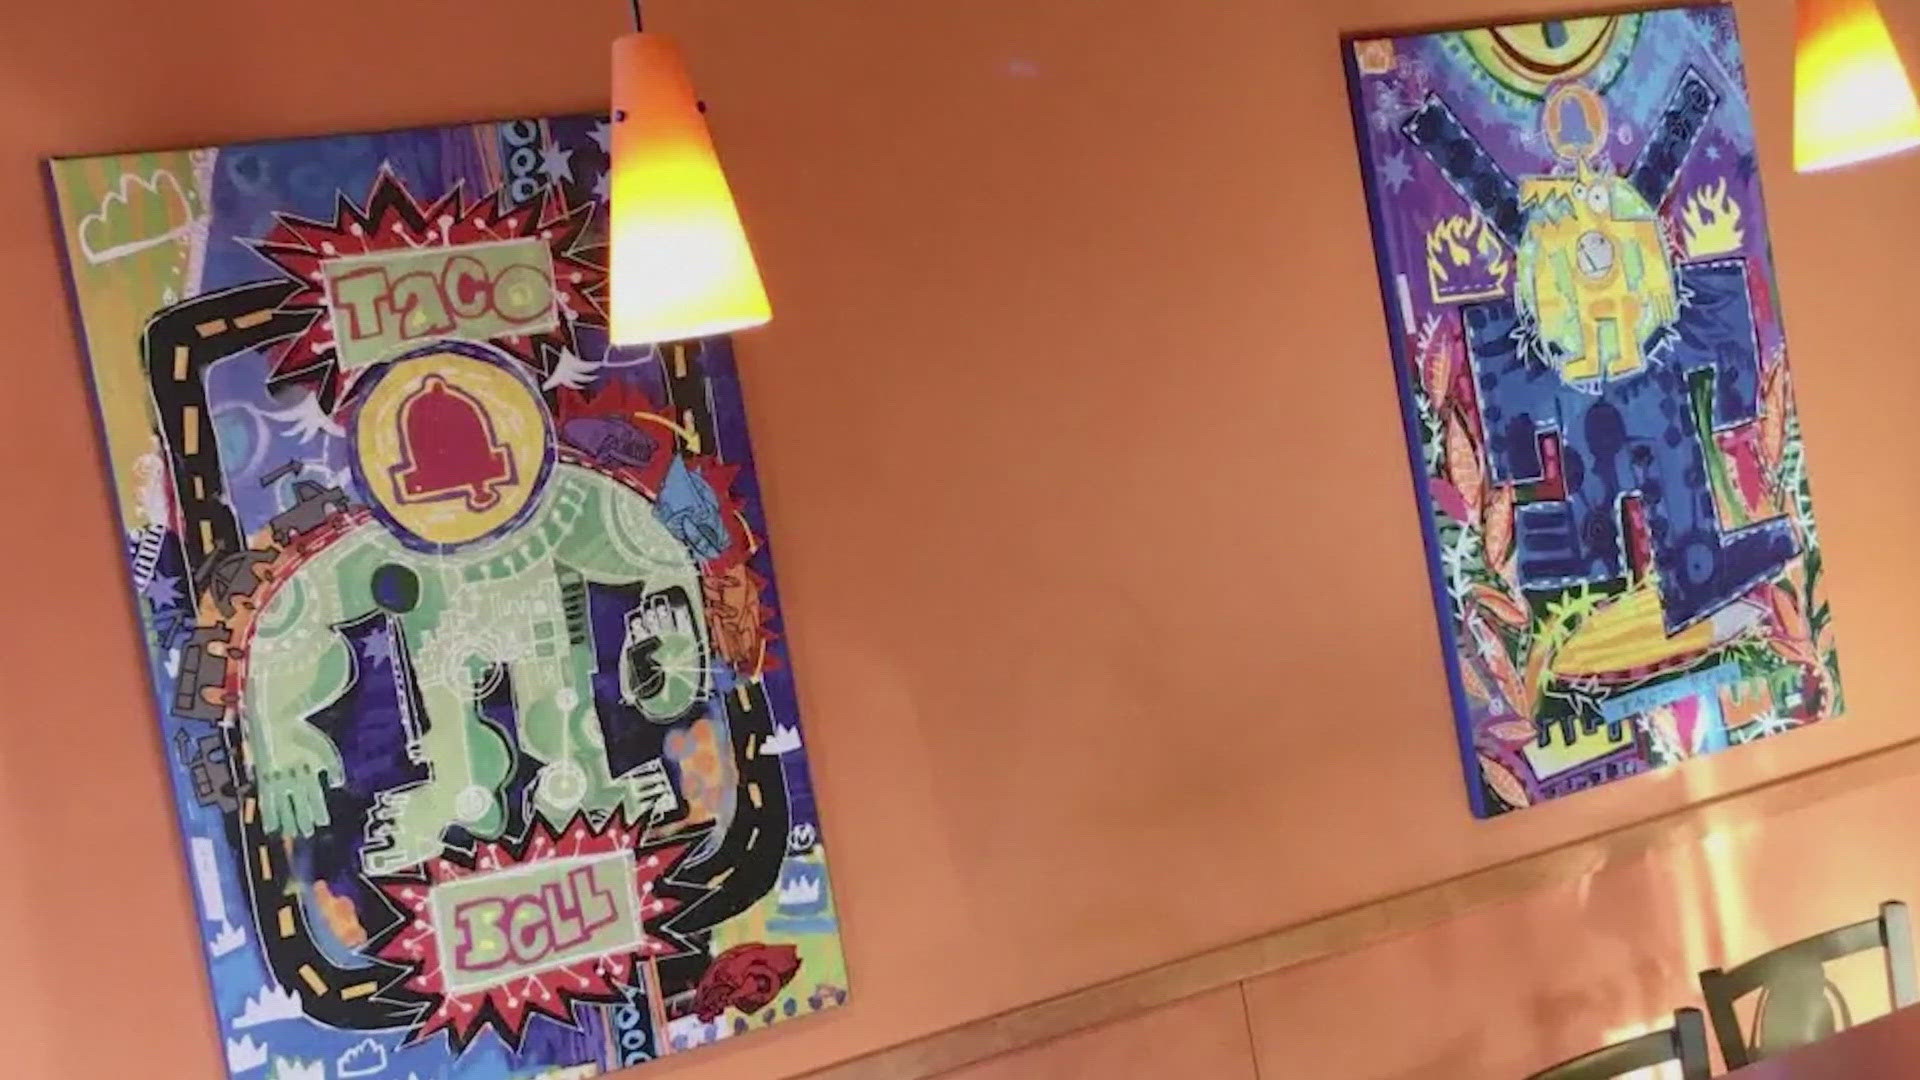 For some, Taco Bell is the perfect place to pull off an art heist stealing the decor right off the walls and selling it for thousands of dollars.